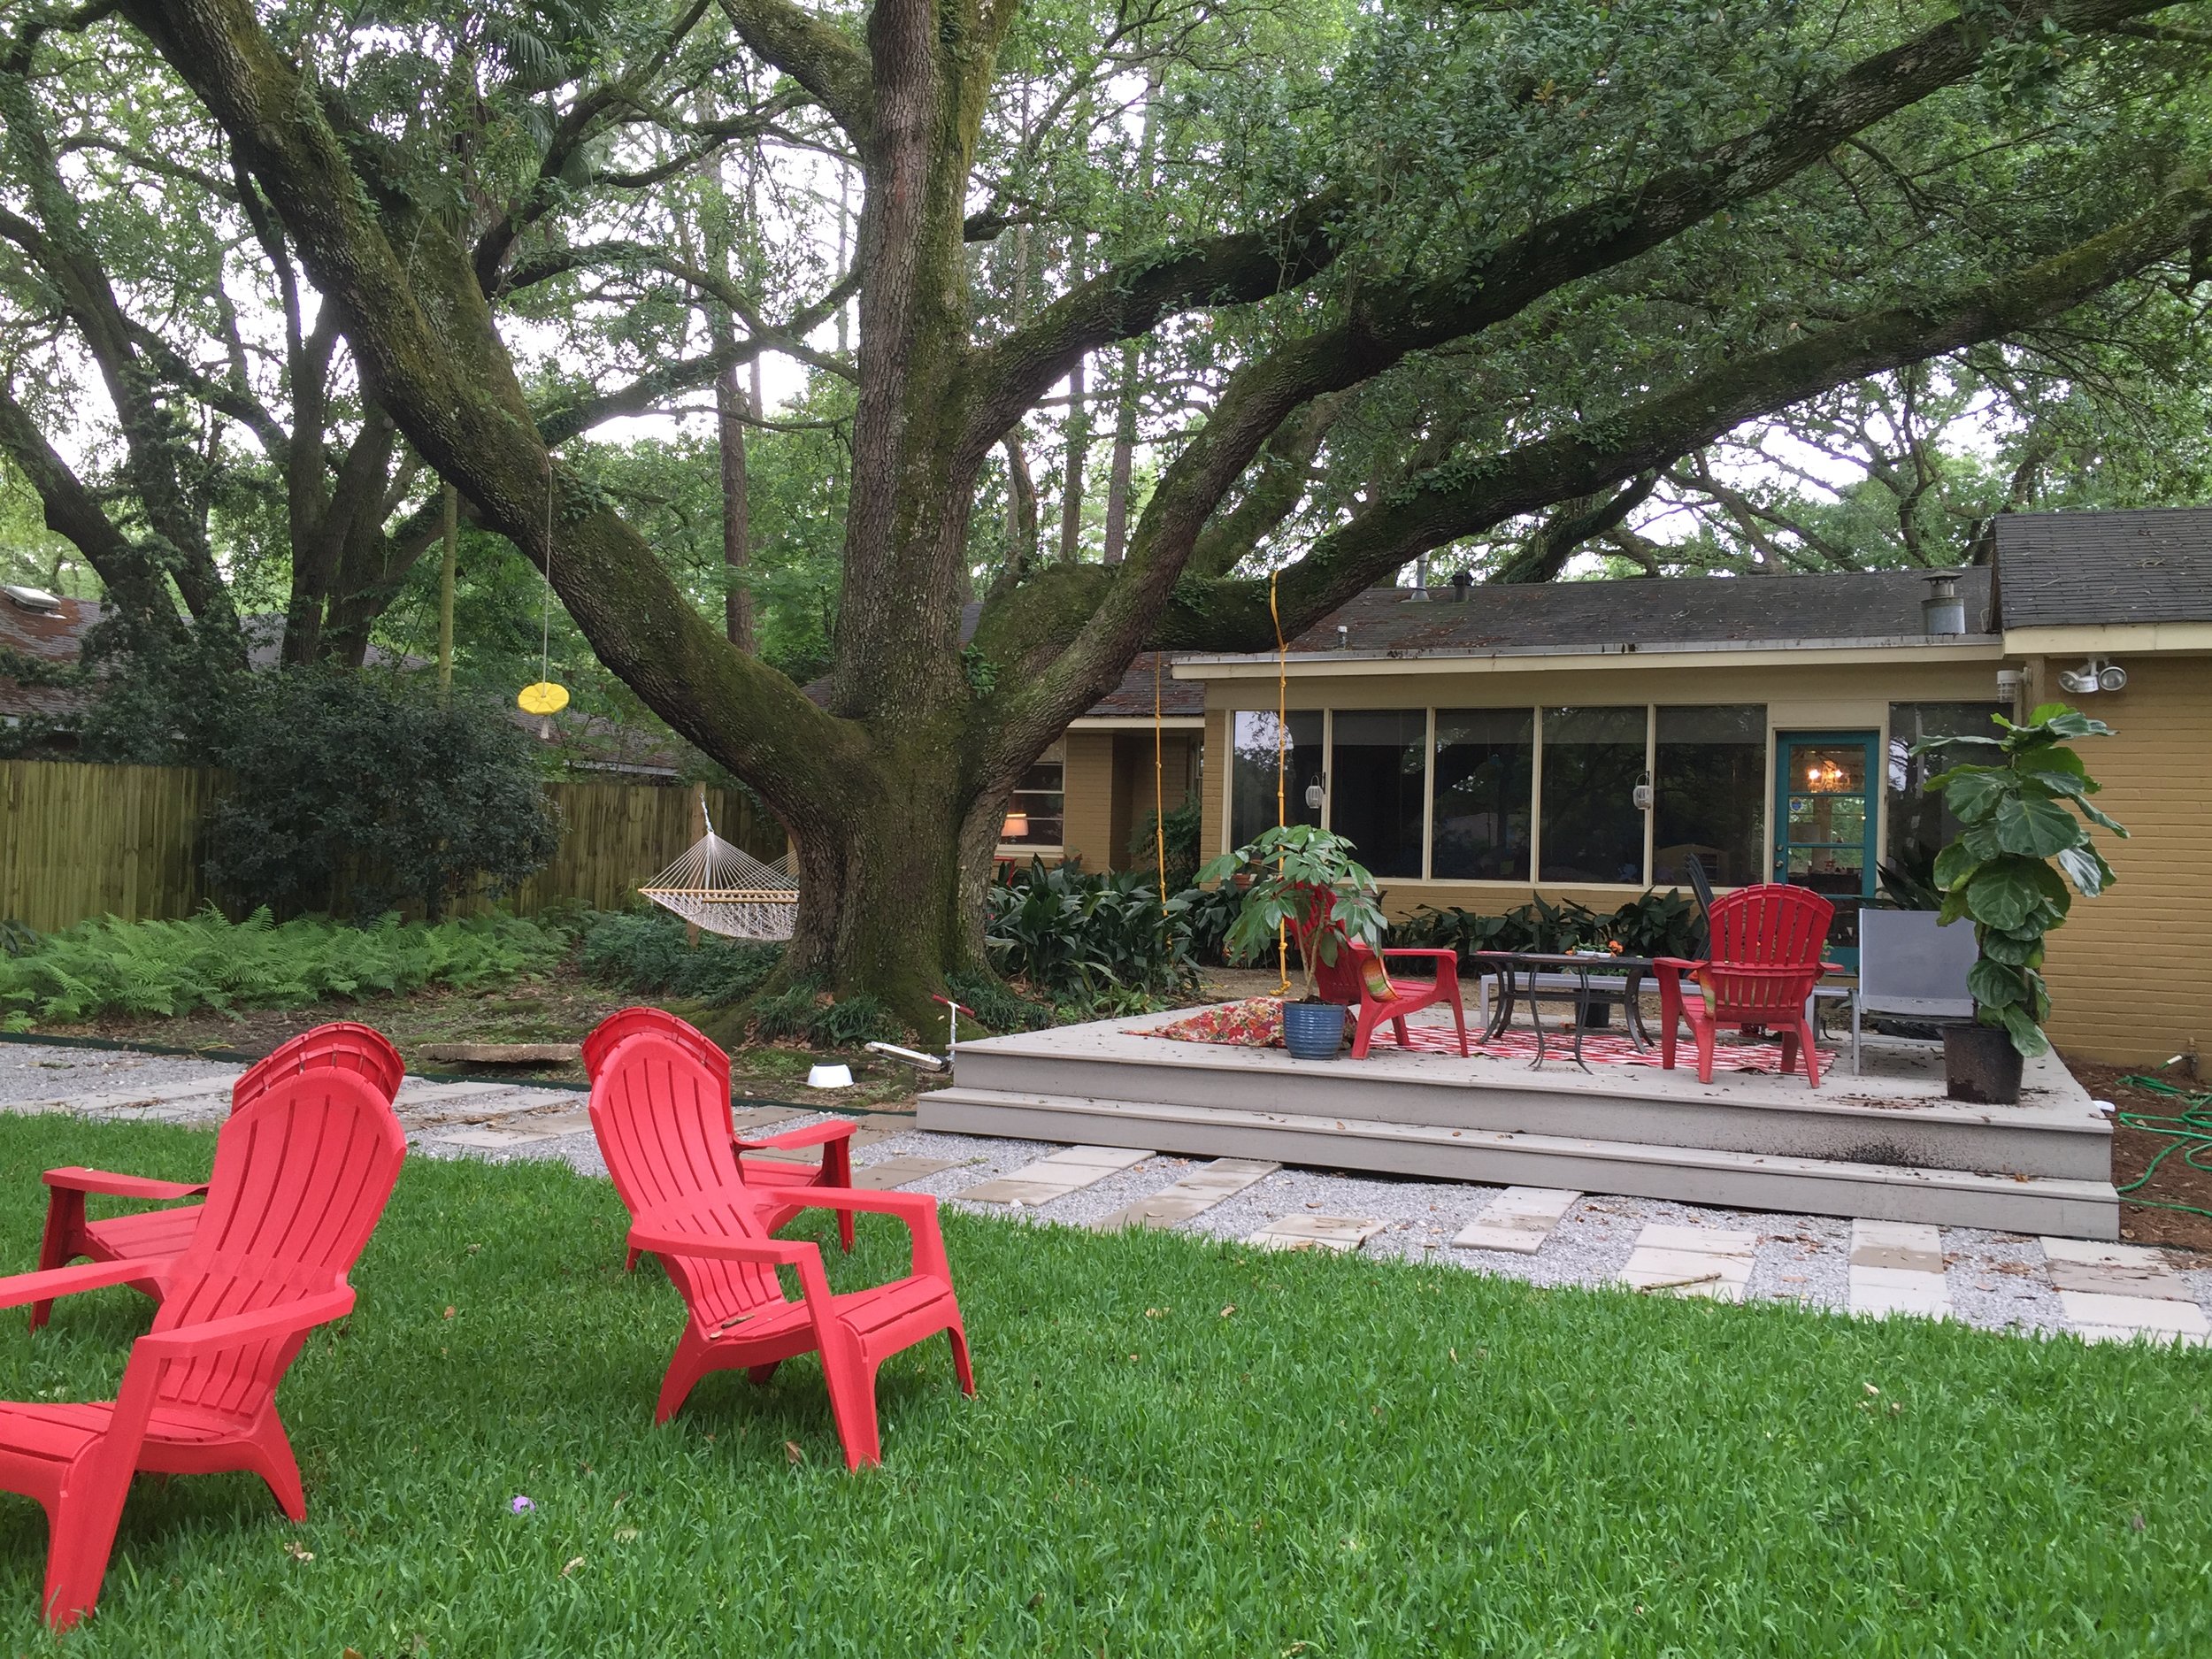 the back yard showcases the large oak tree and plenty of seating areas for the family.